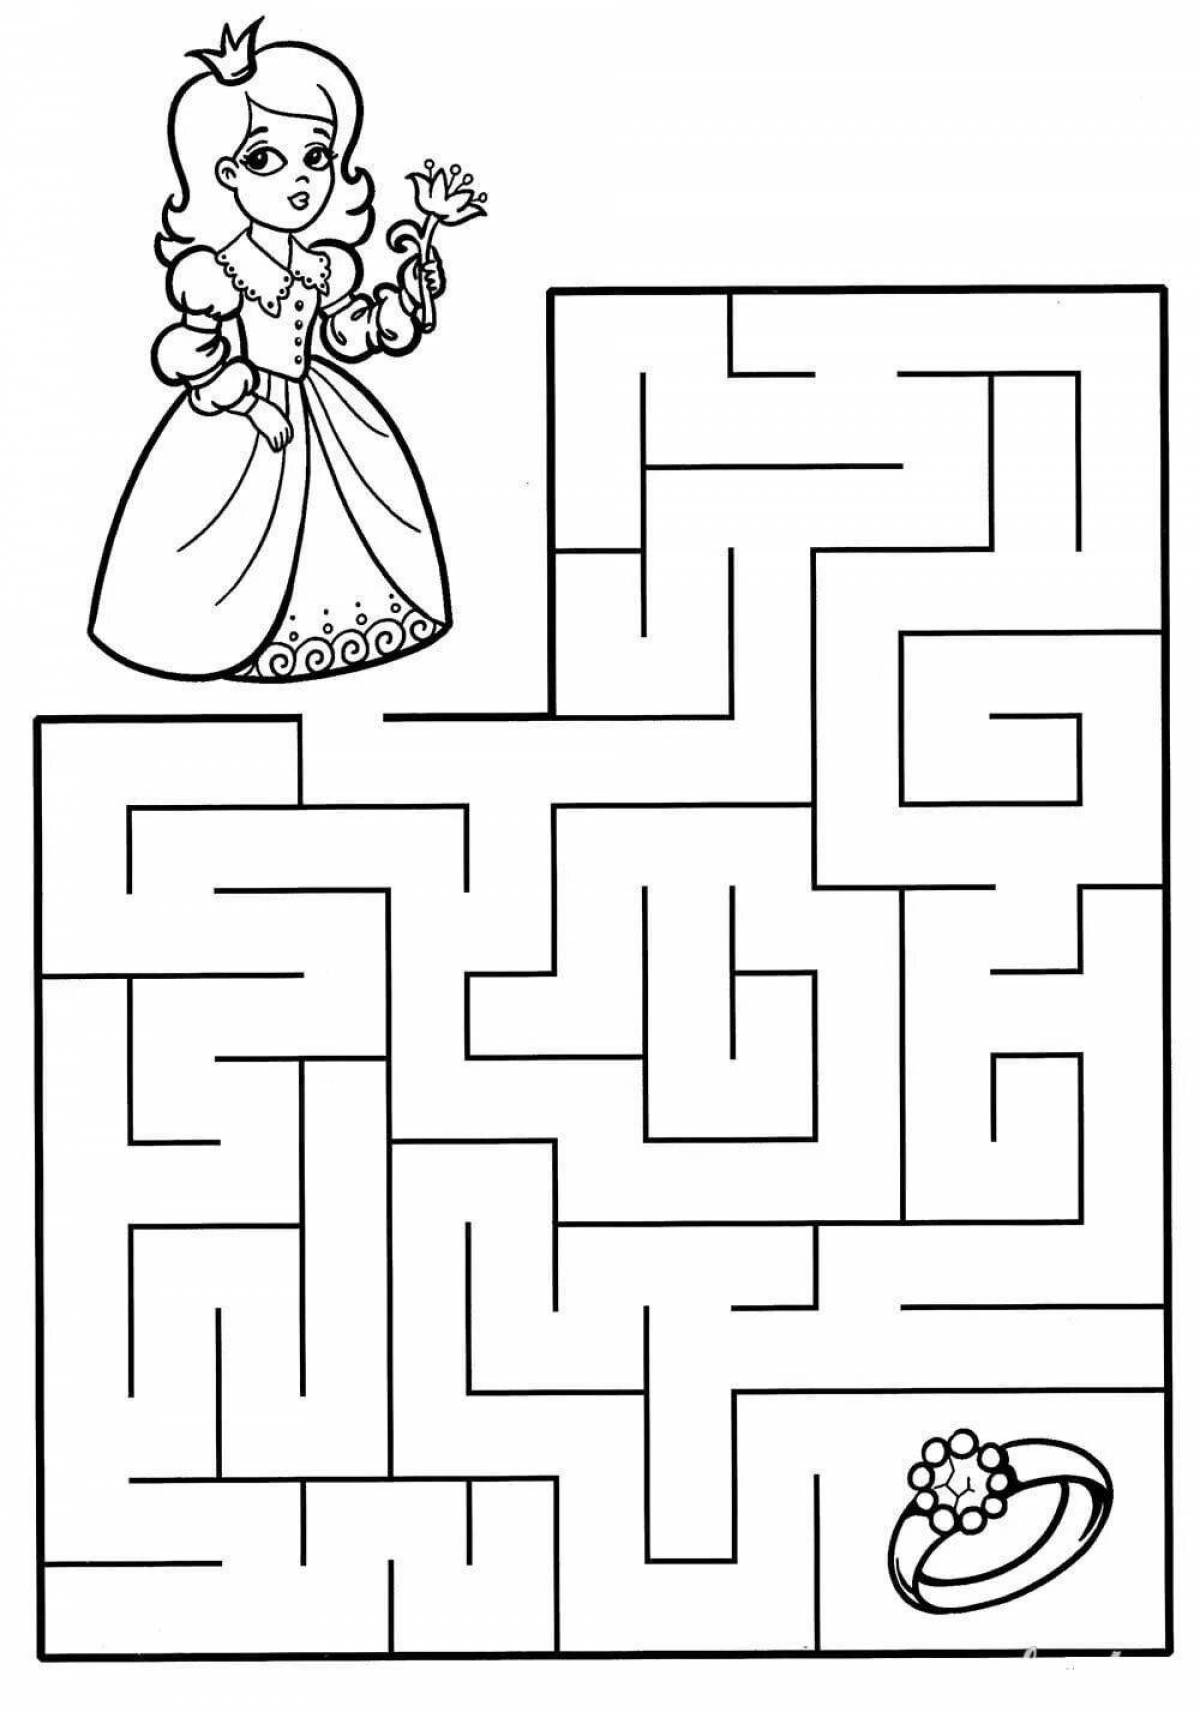 Mazes for children 6 7 years old #9